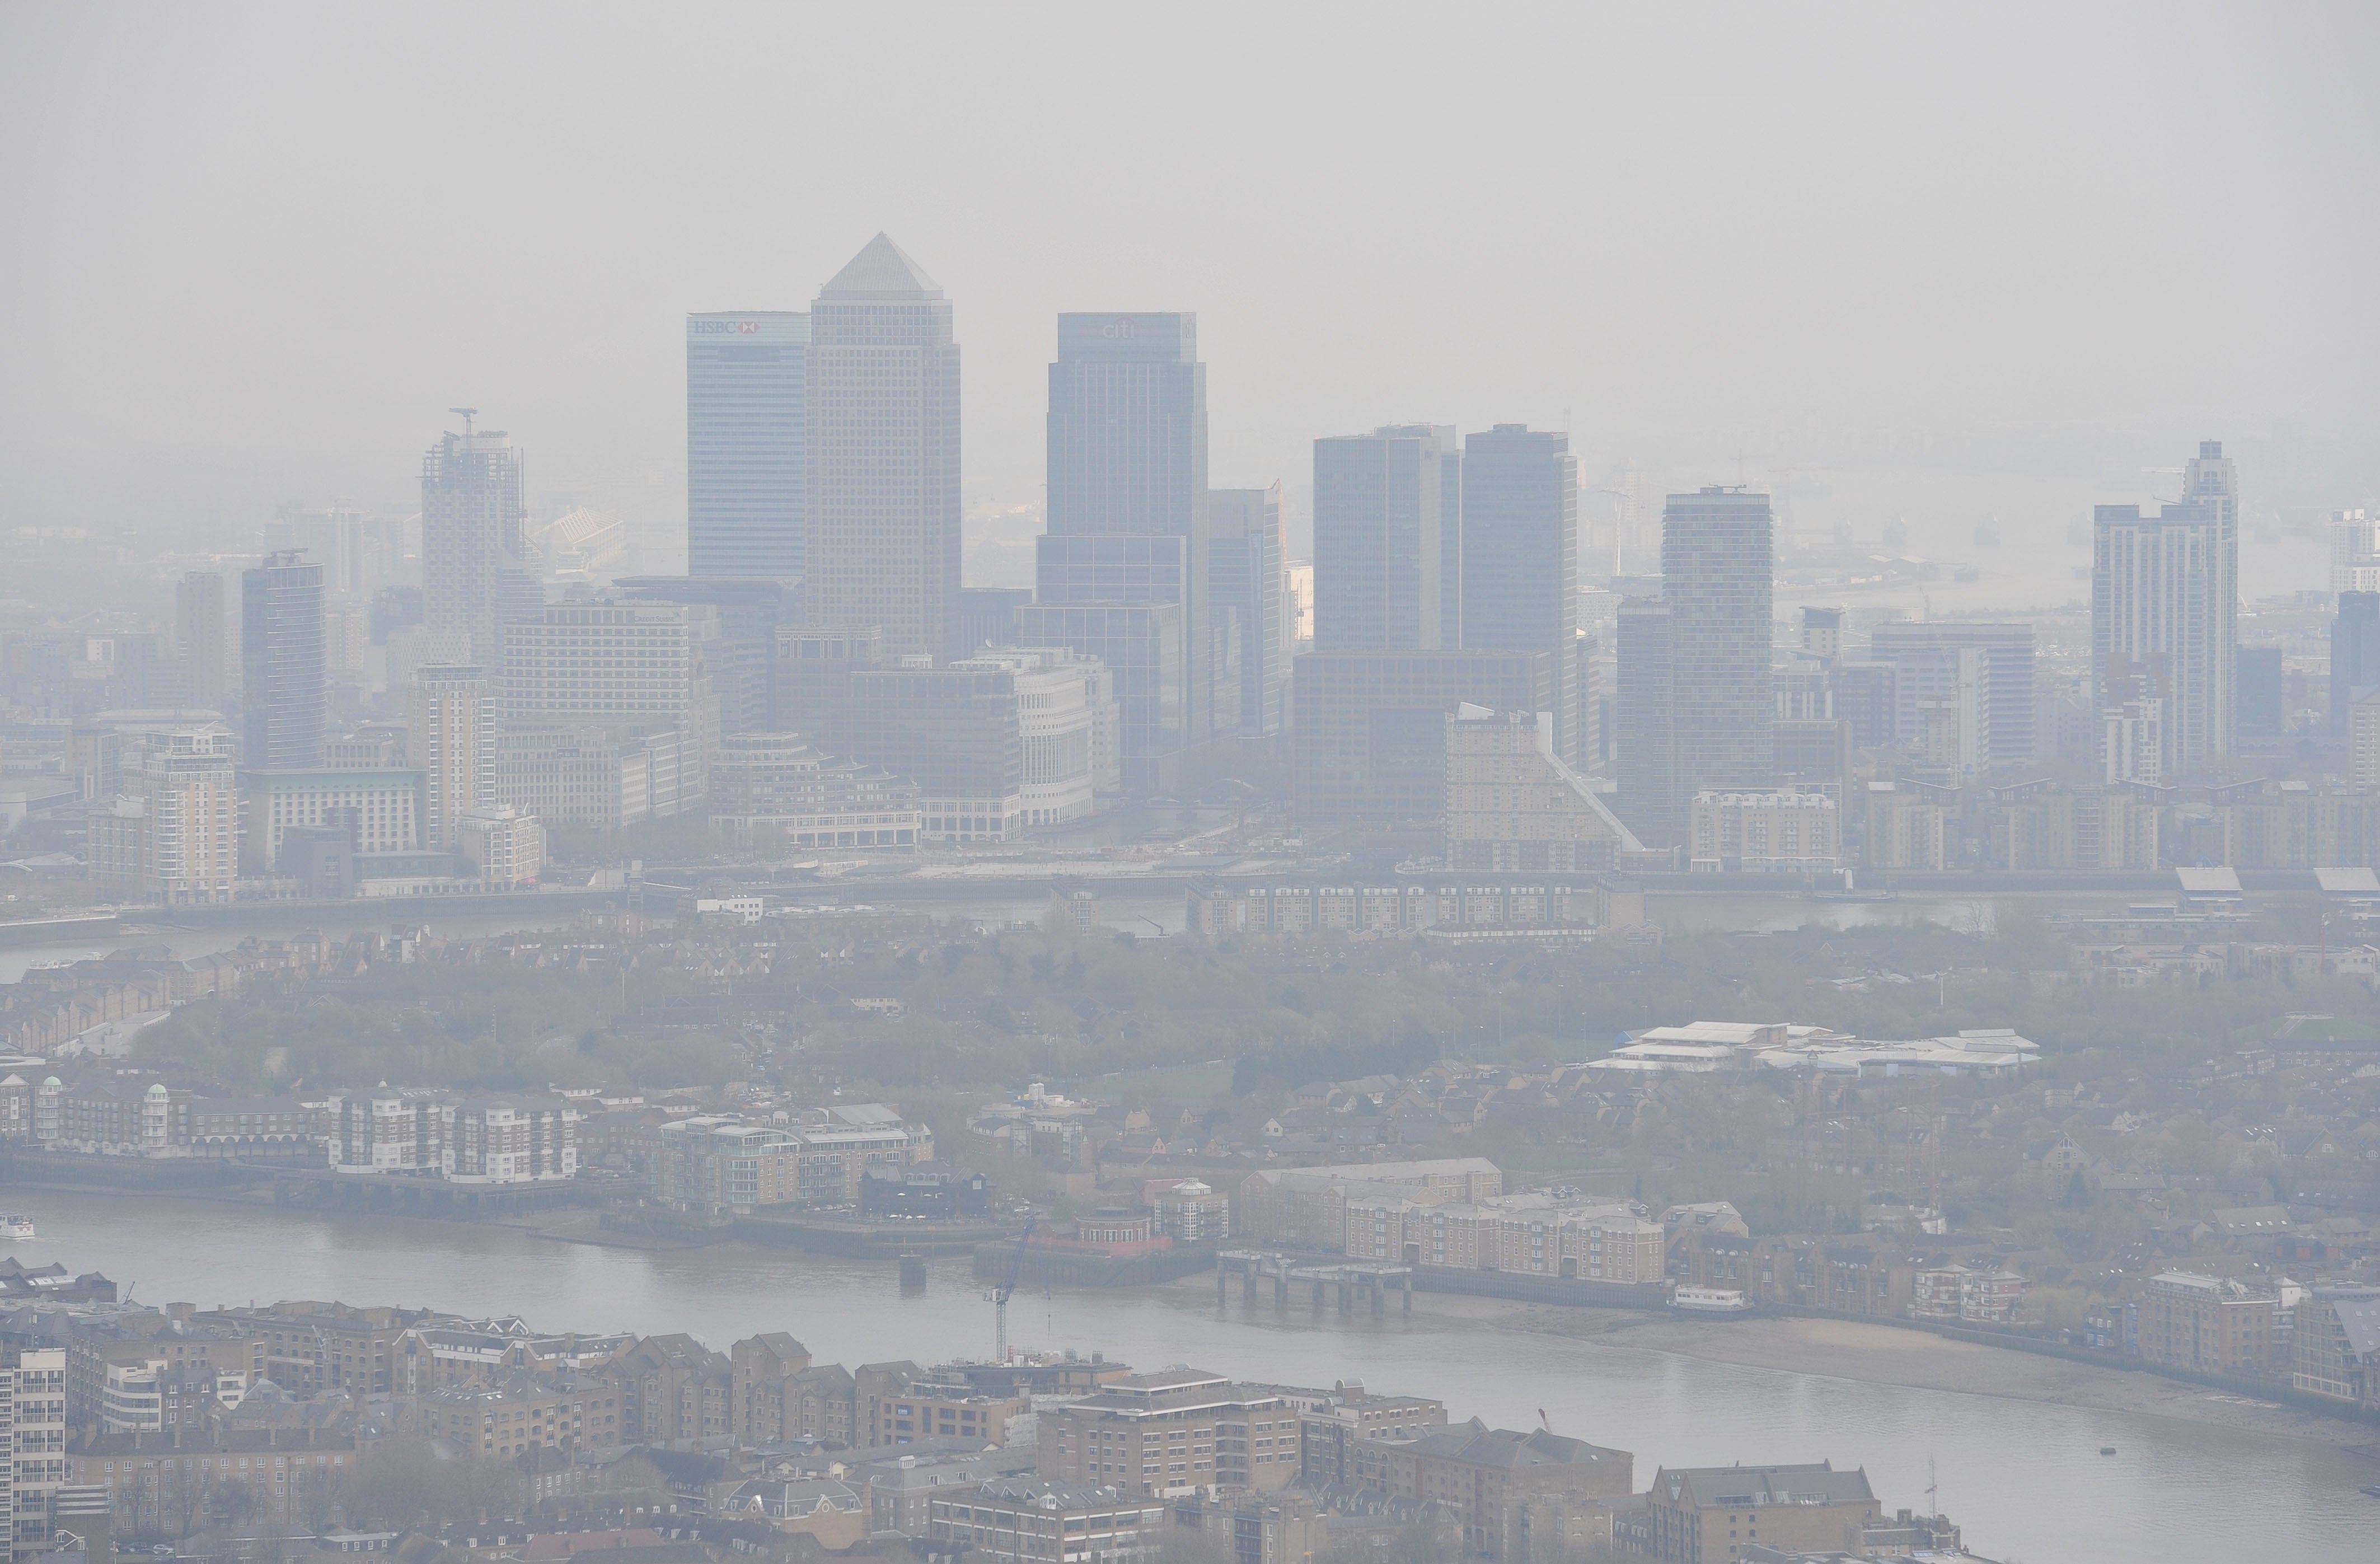 A study found that while hospitals and medical centres in the city met the legal UK air quality limits, they still failed the stricter WHO guidelines around the two main air pollutants of concern – nitrogen dioxide and fine particulate matter